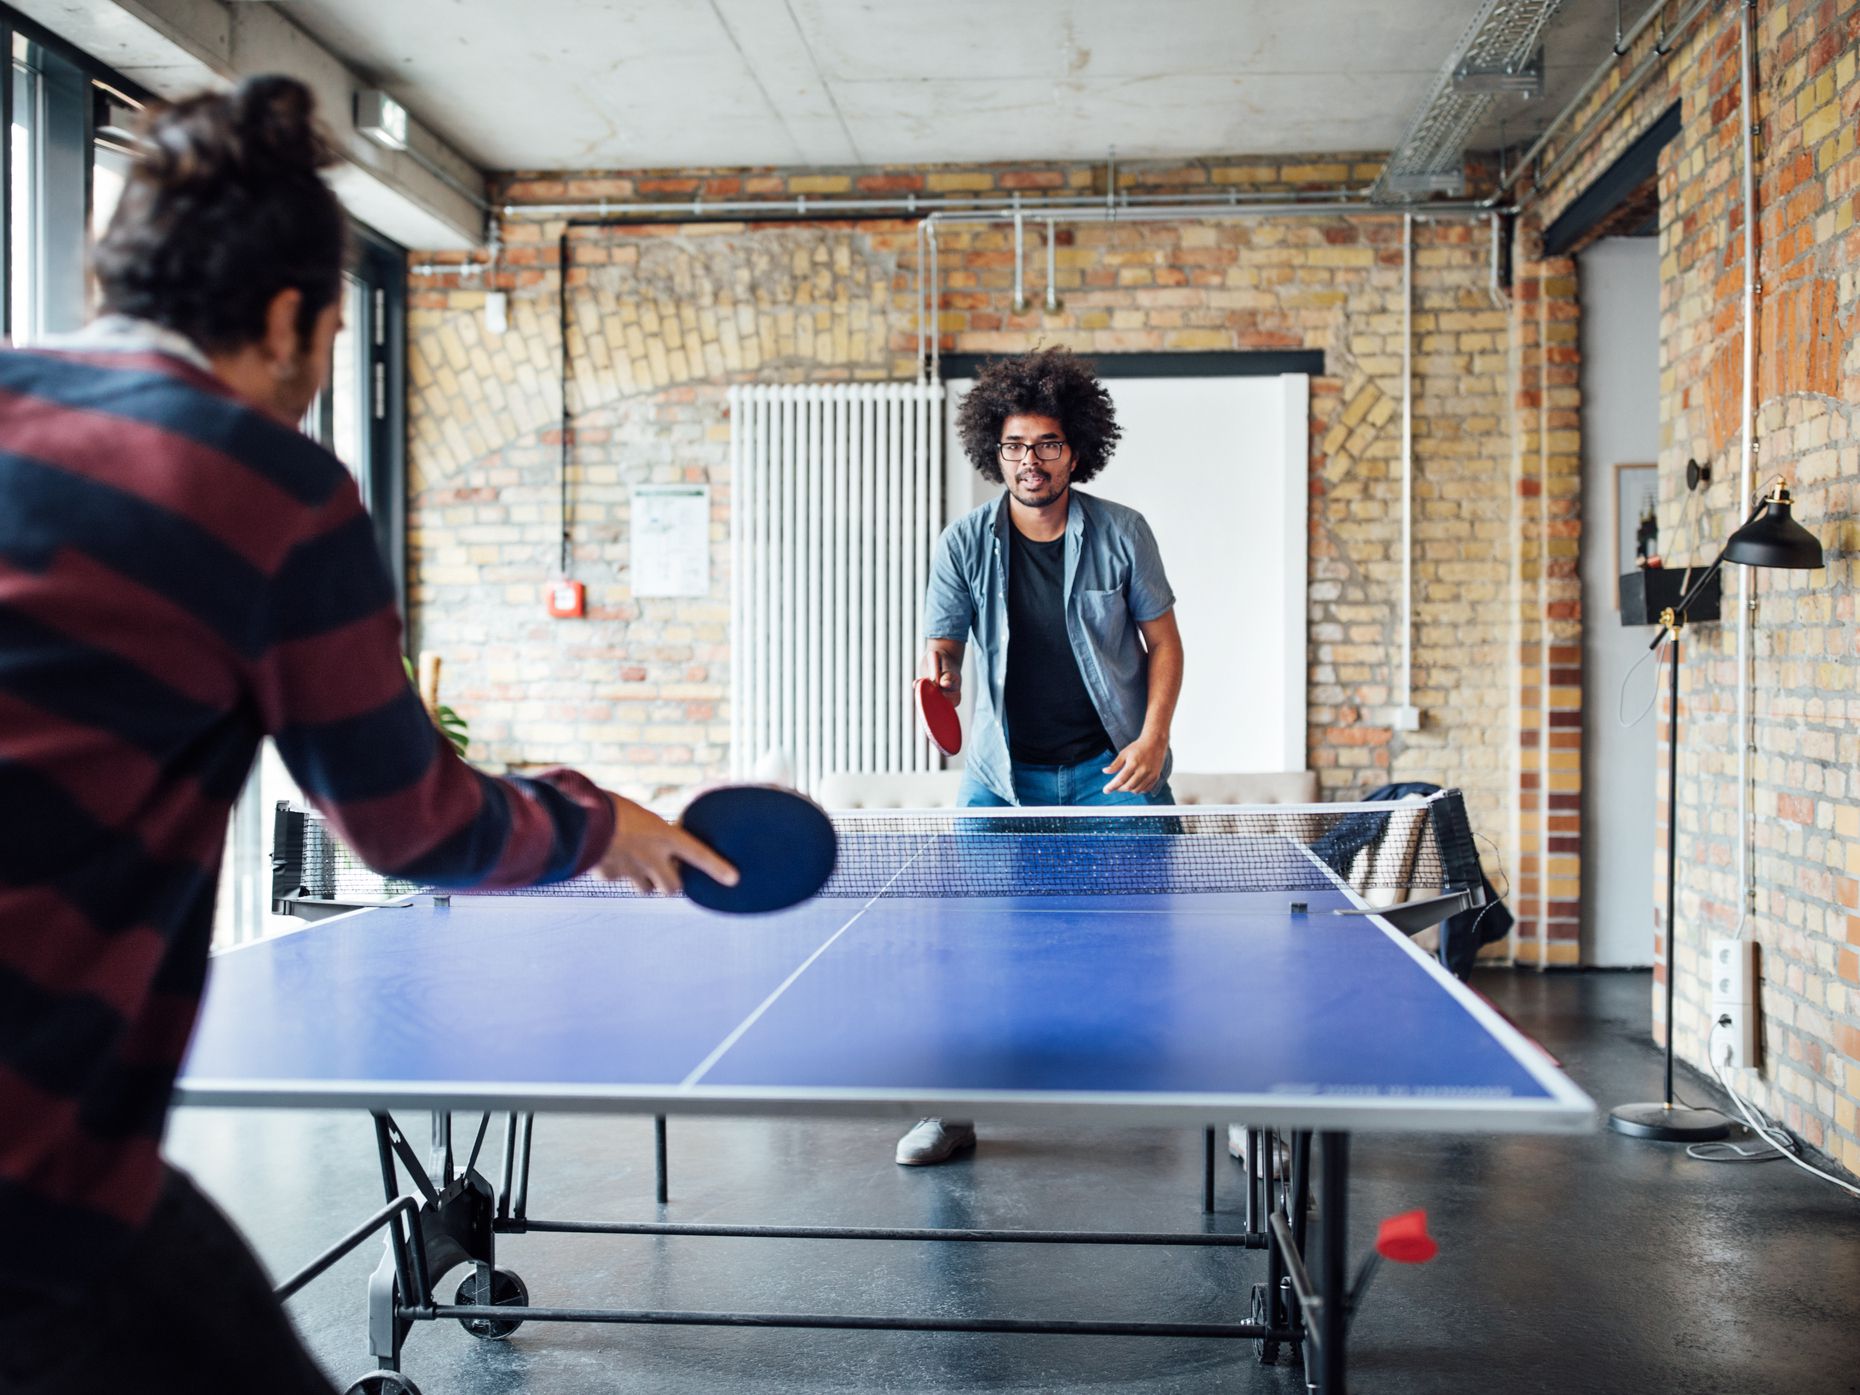 ping pong Improves Coordination